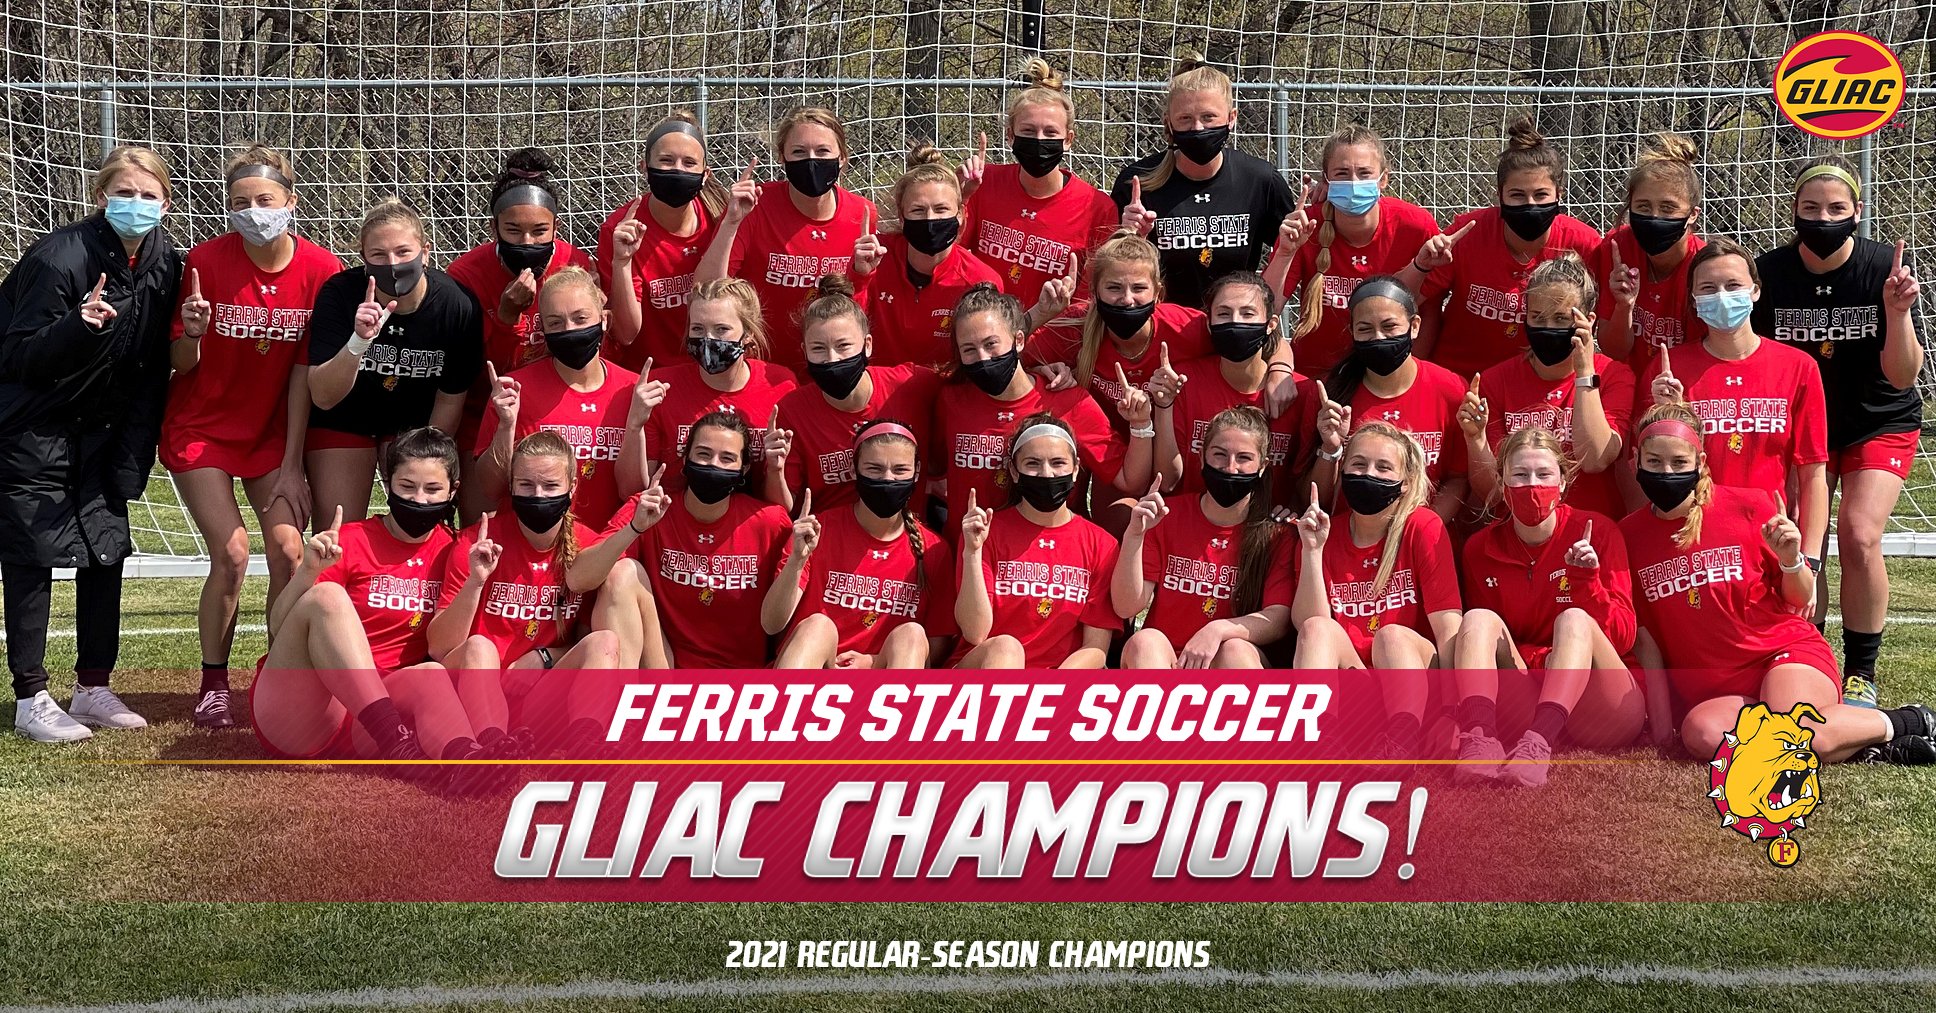 Ferris State Wins School's First GLIAC Soccer Championship To Secure #1 Seed For League Tourney